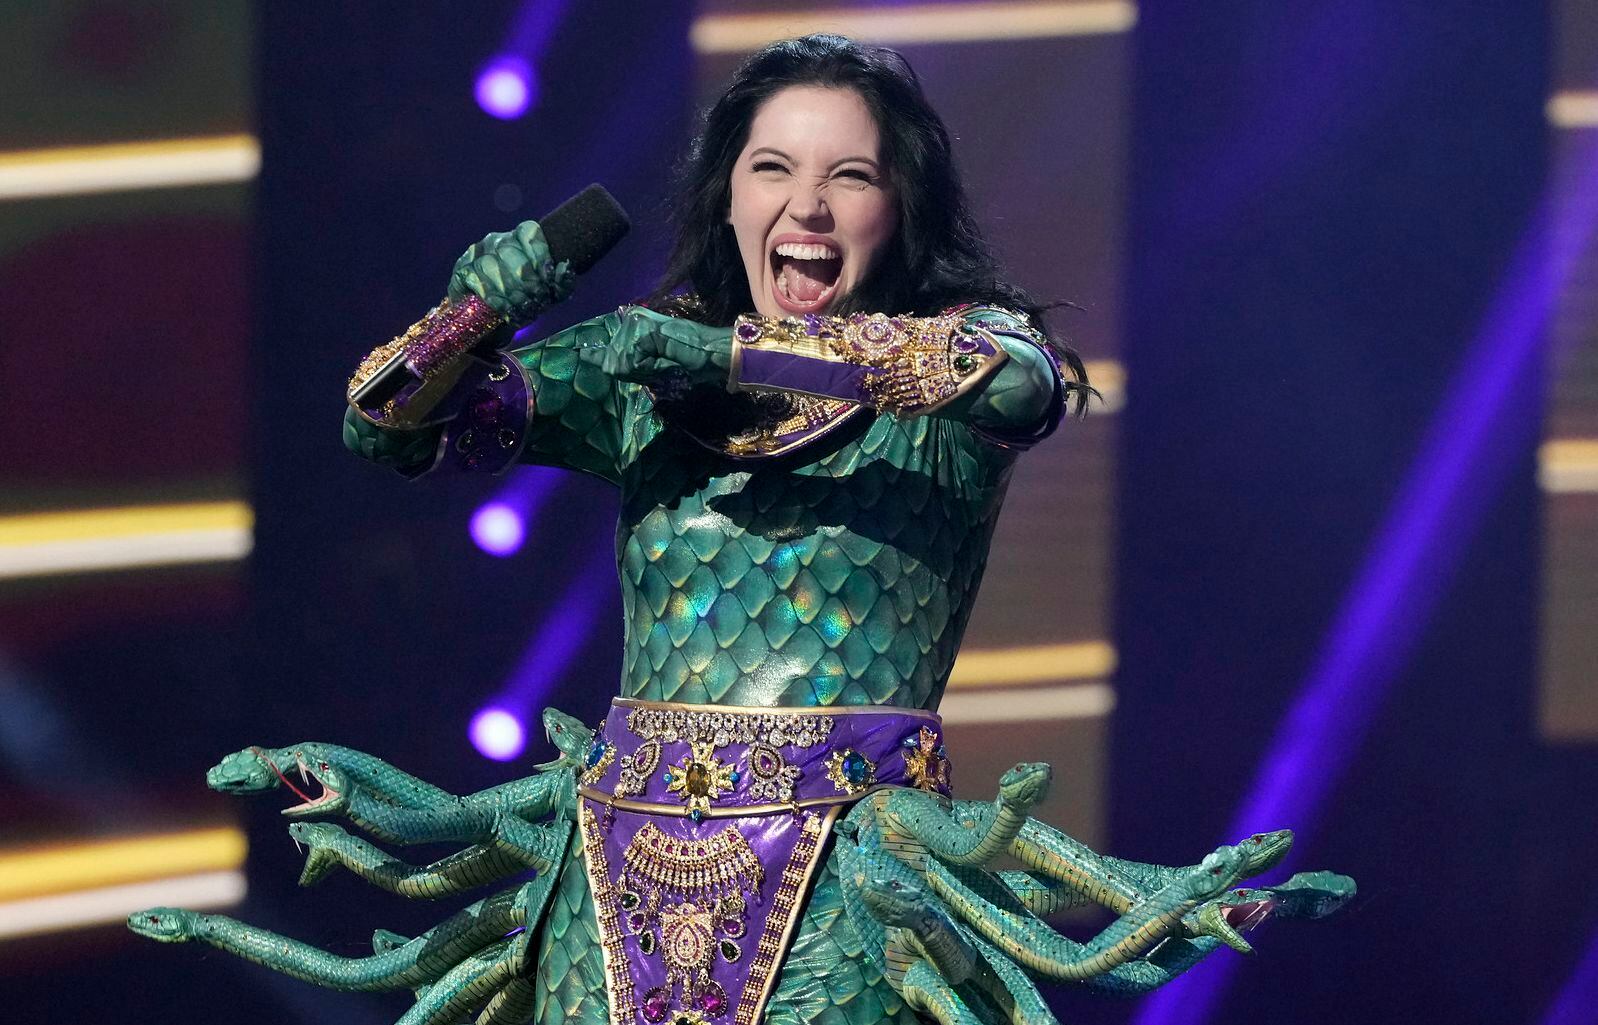 (Michael Becker | Fox) Bishop Briggs was named the winner of "The Masked Singer" on Wednesday.